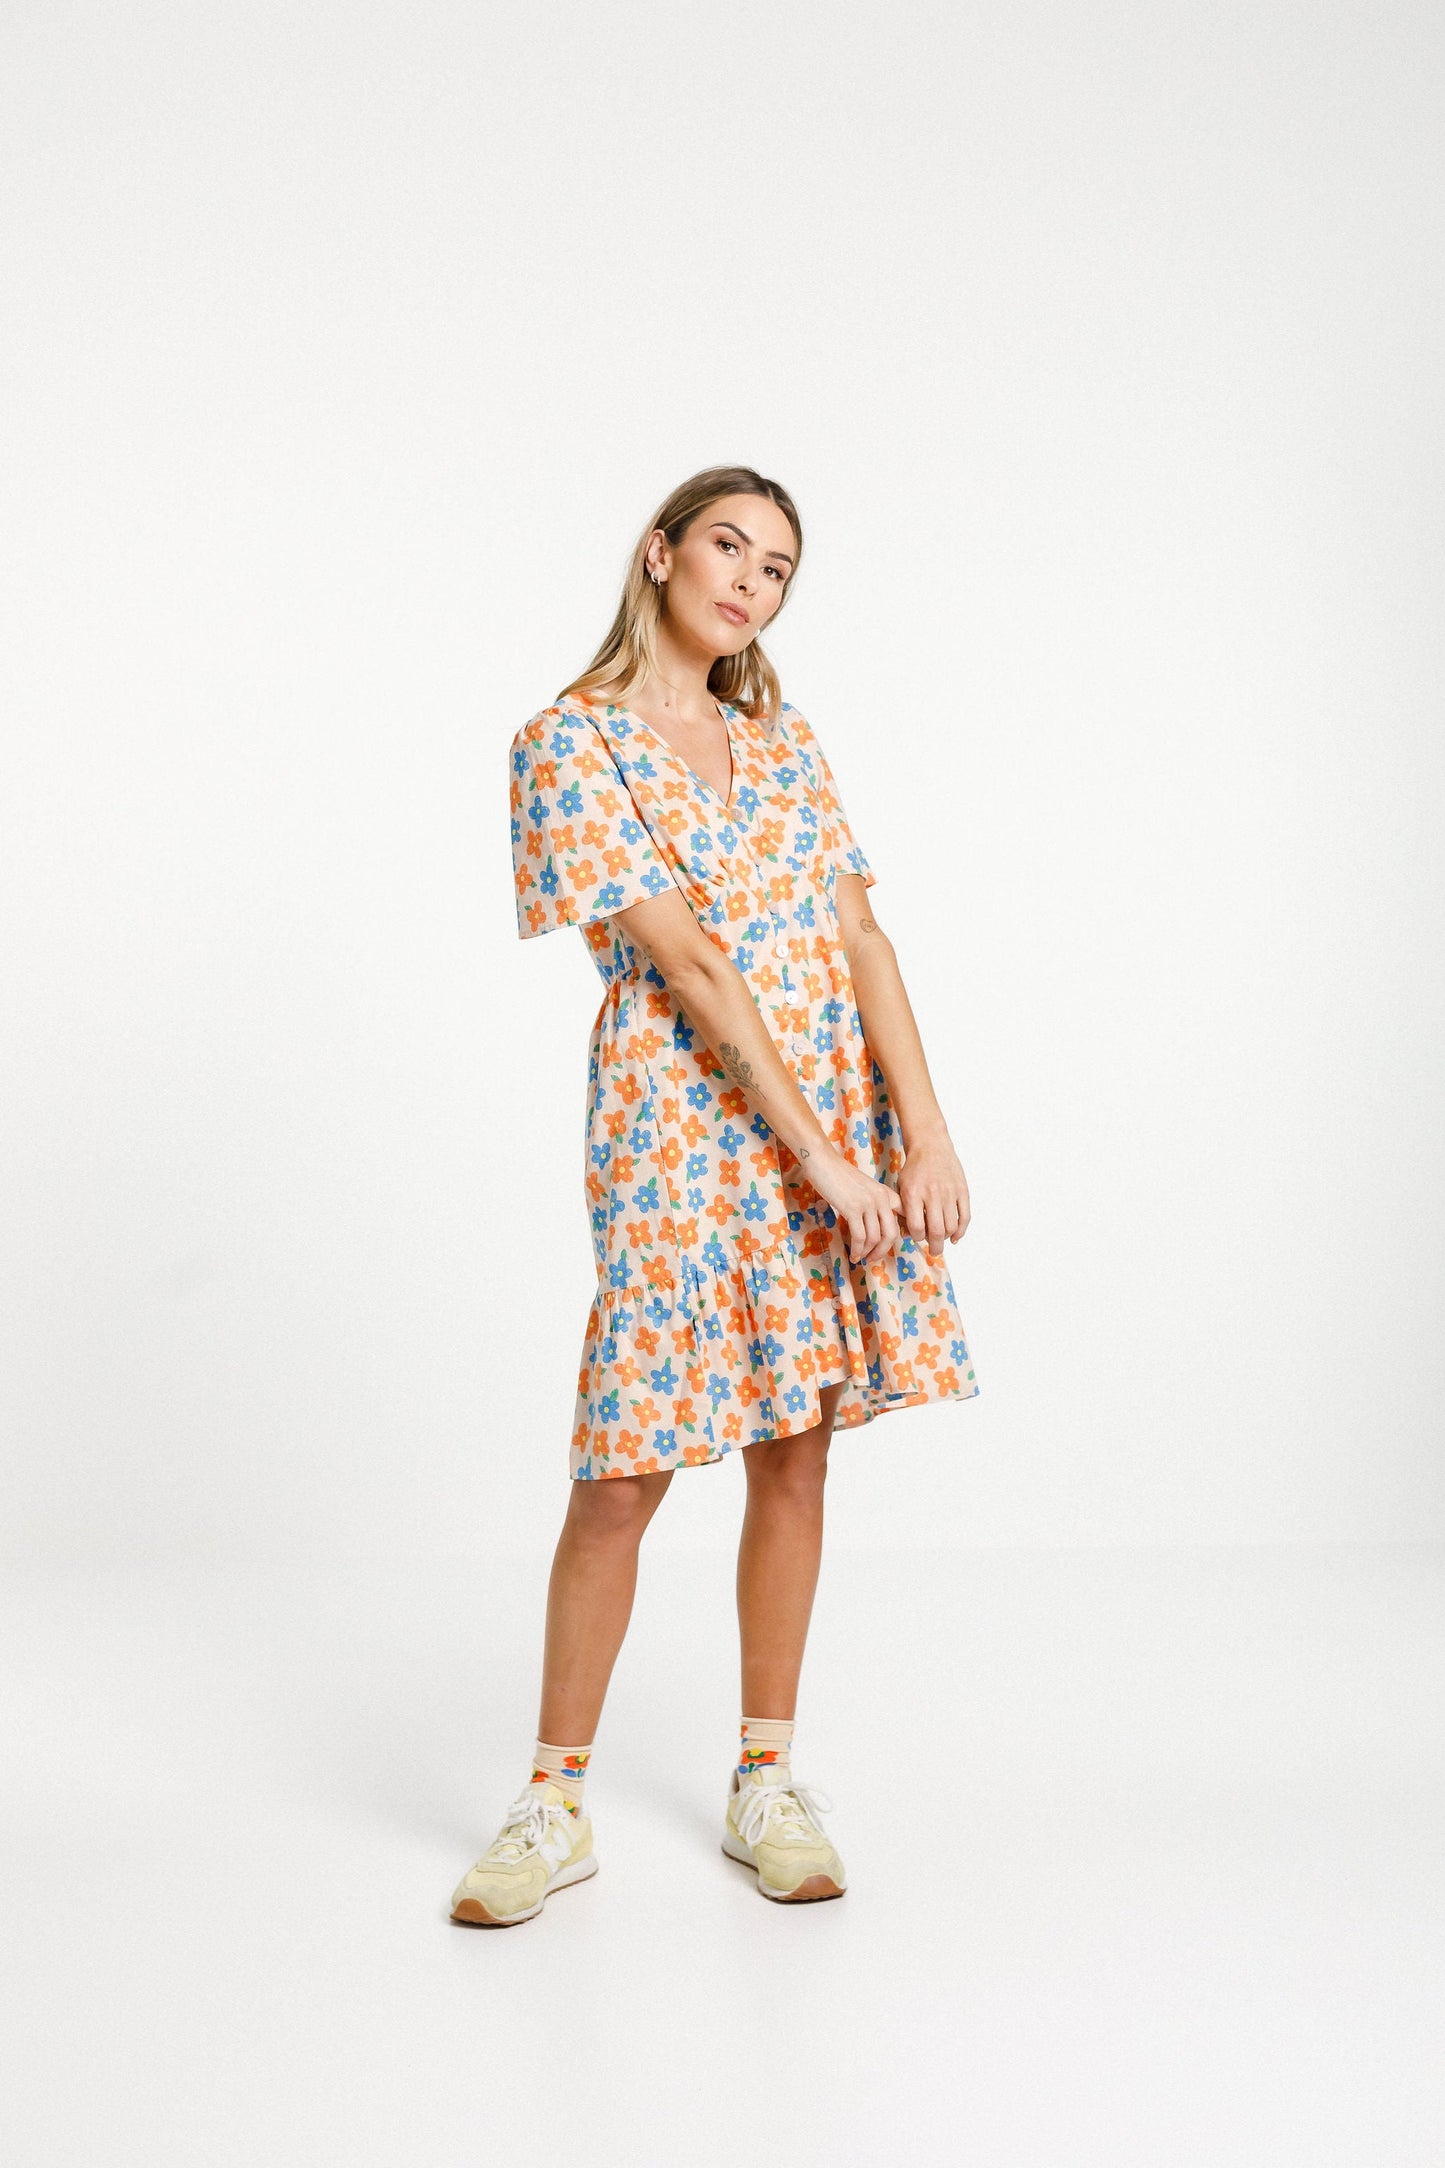 THING THING HAPPY TIMES DRESS - MARIGOLD - THE VOGUE STORE